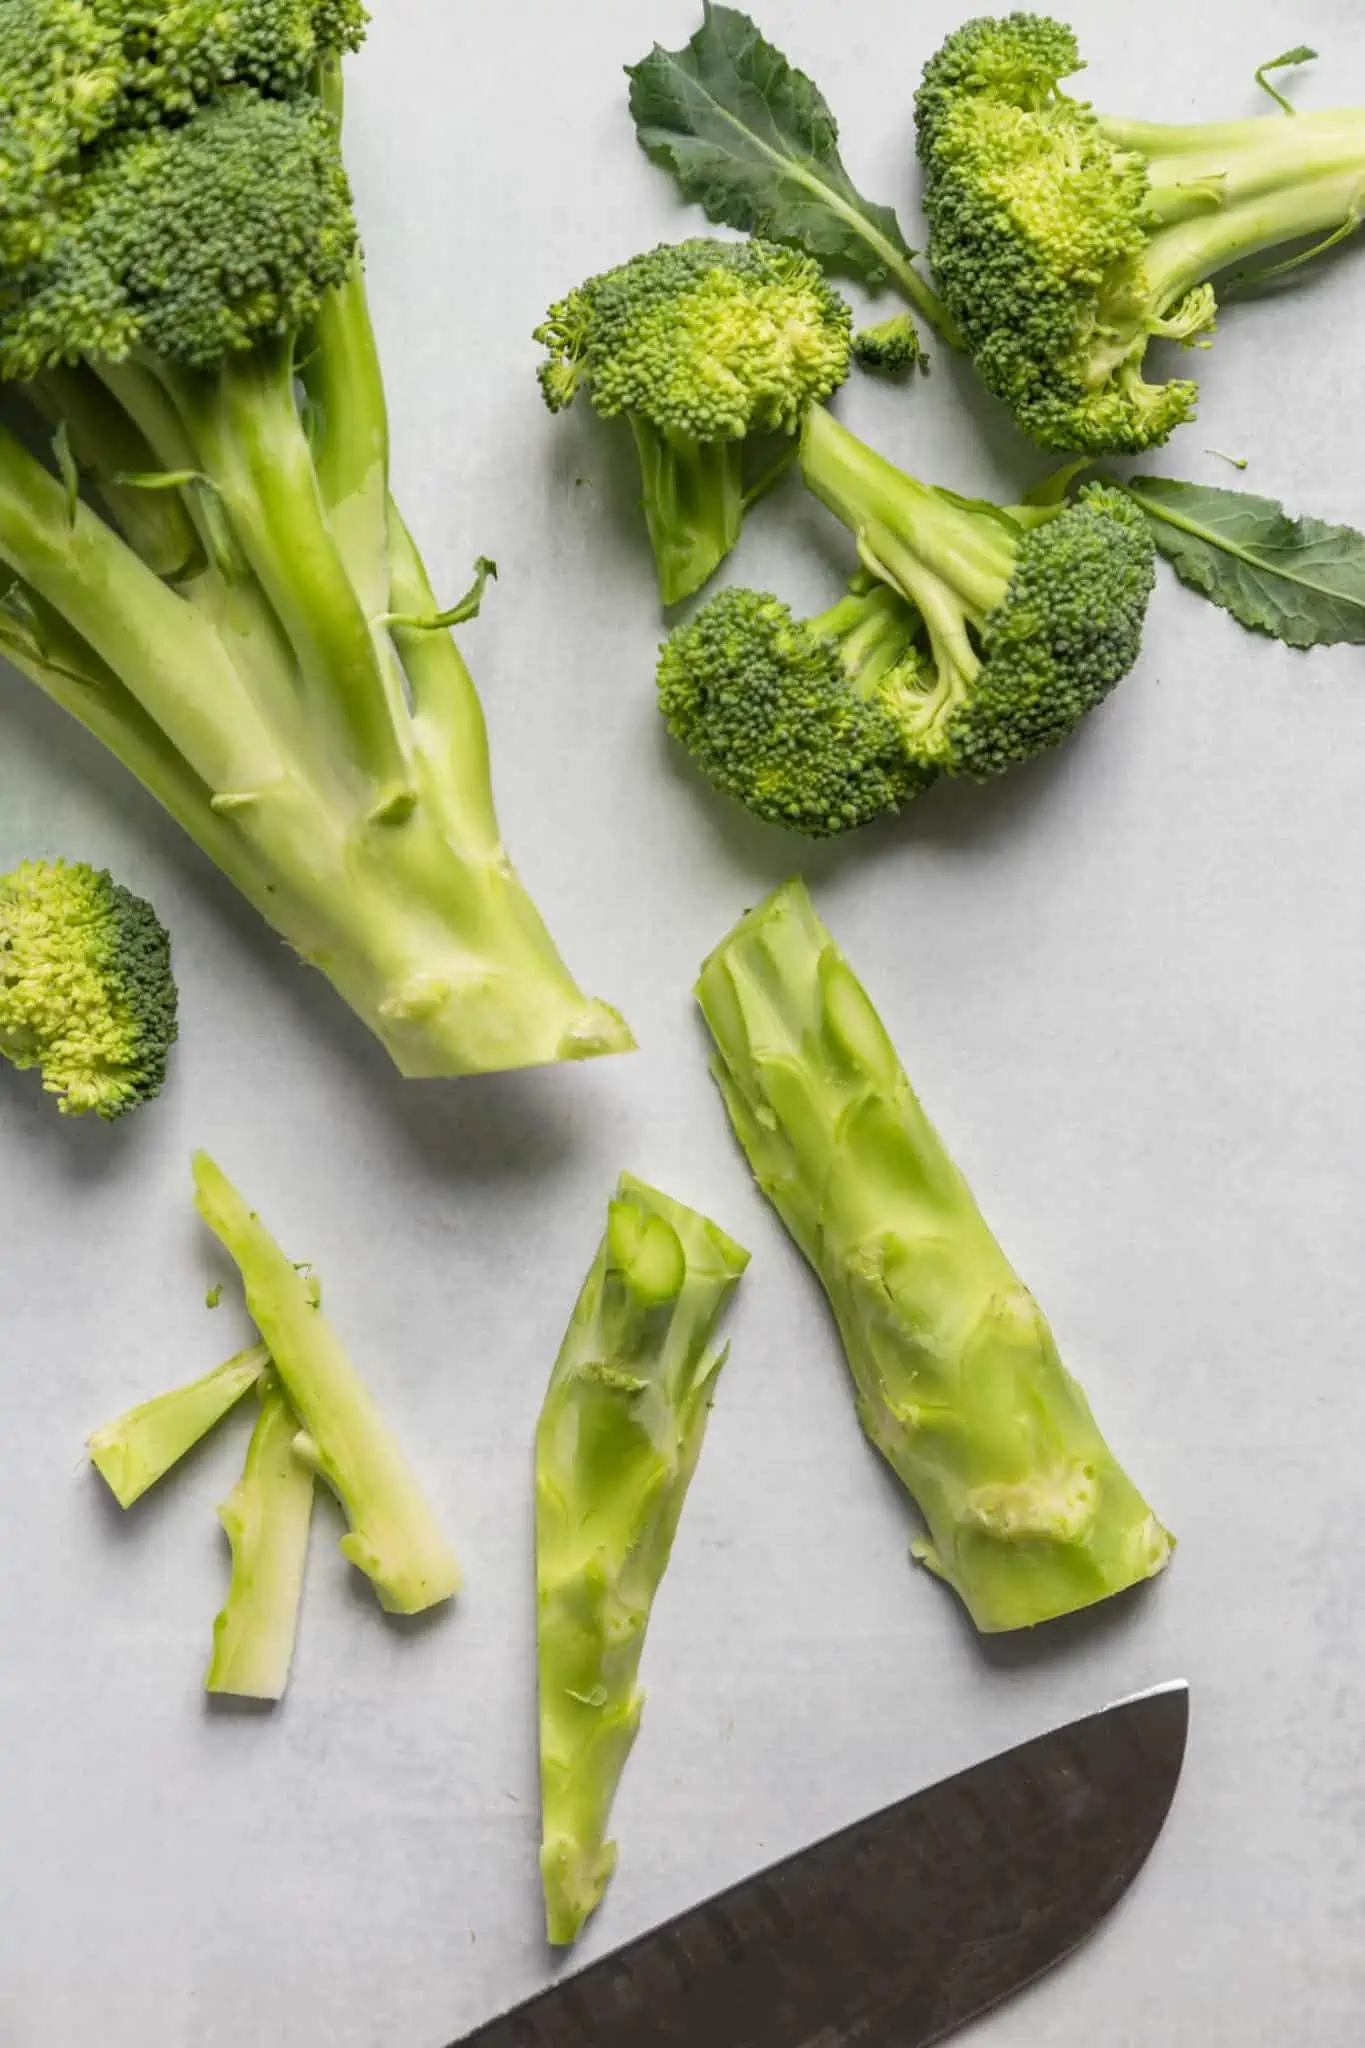 Broccoli stalks chopped on a cutting board with a chefs knife